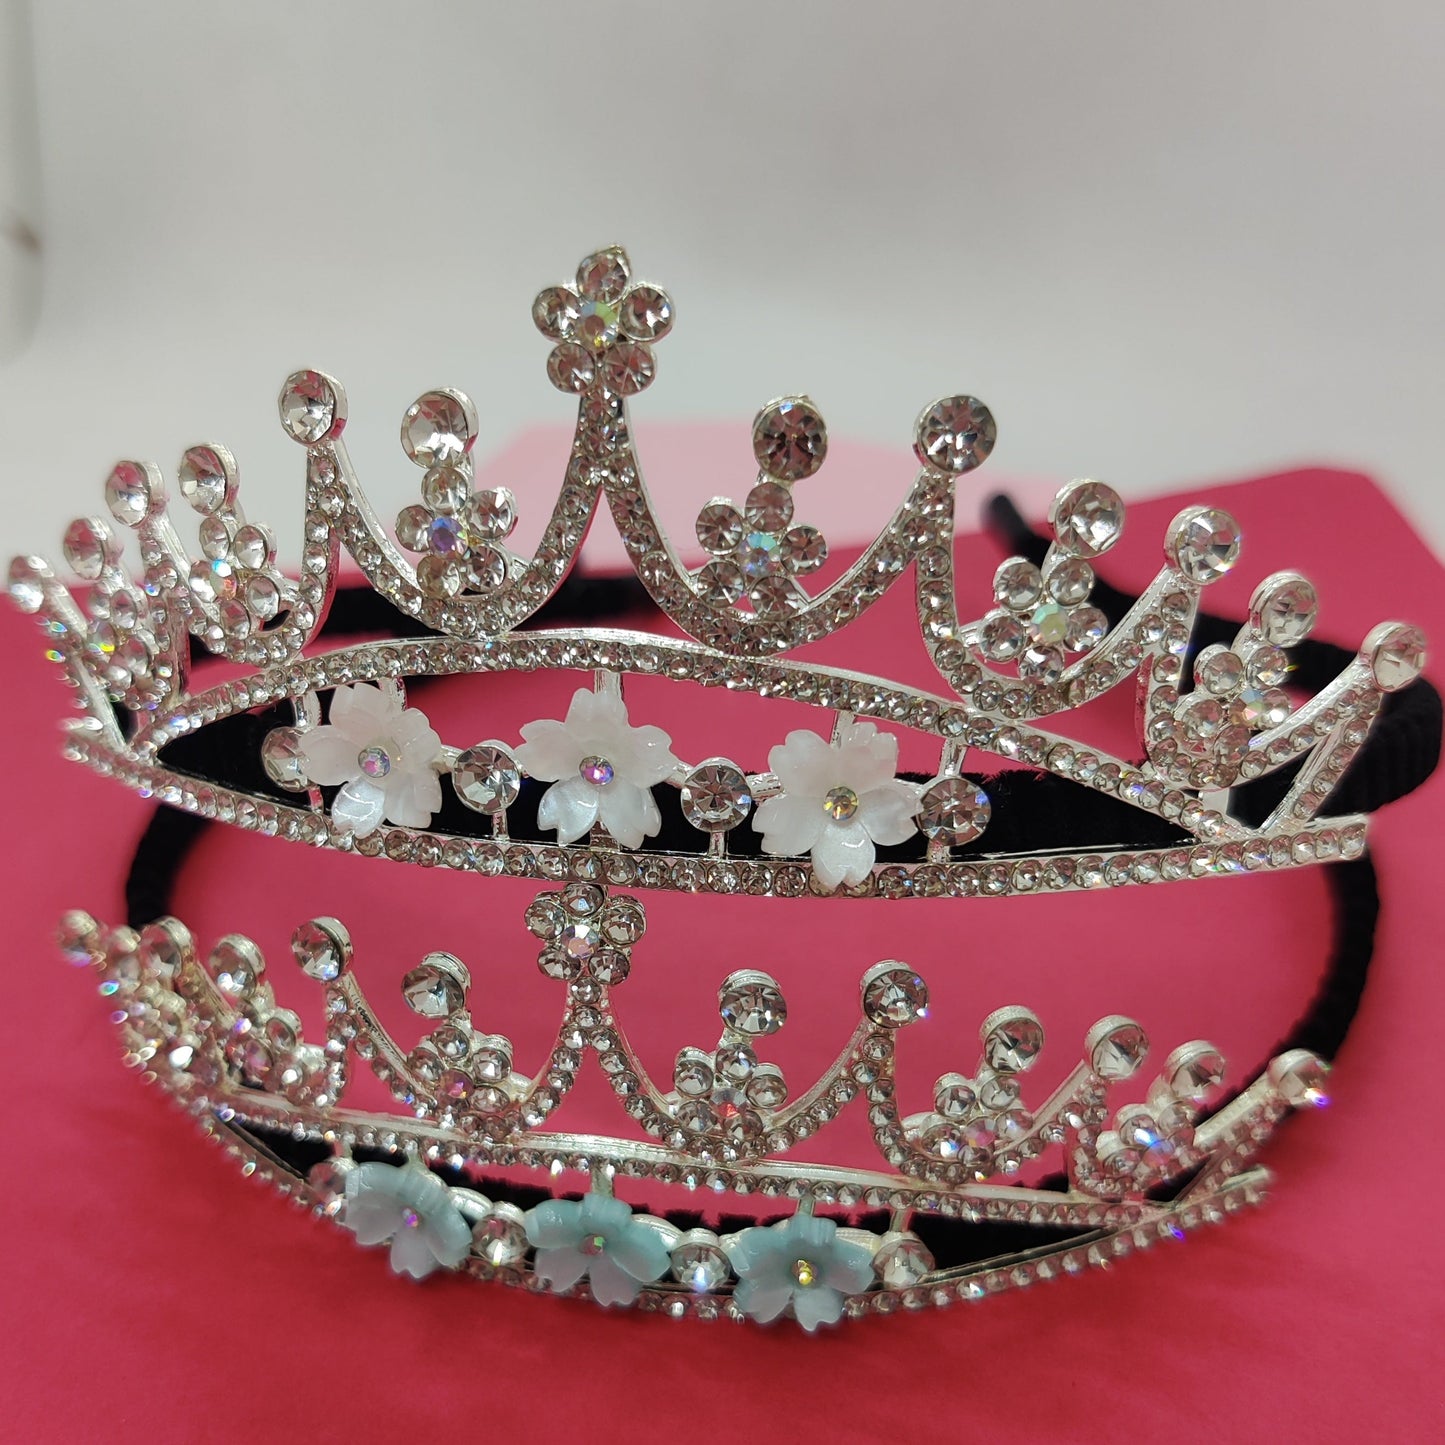 BEADED CROWN APPLIQUE HAIRBAND